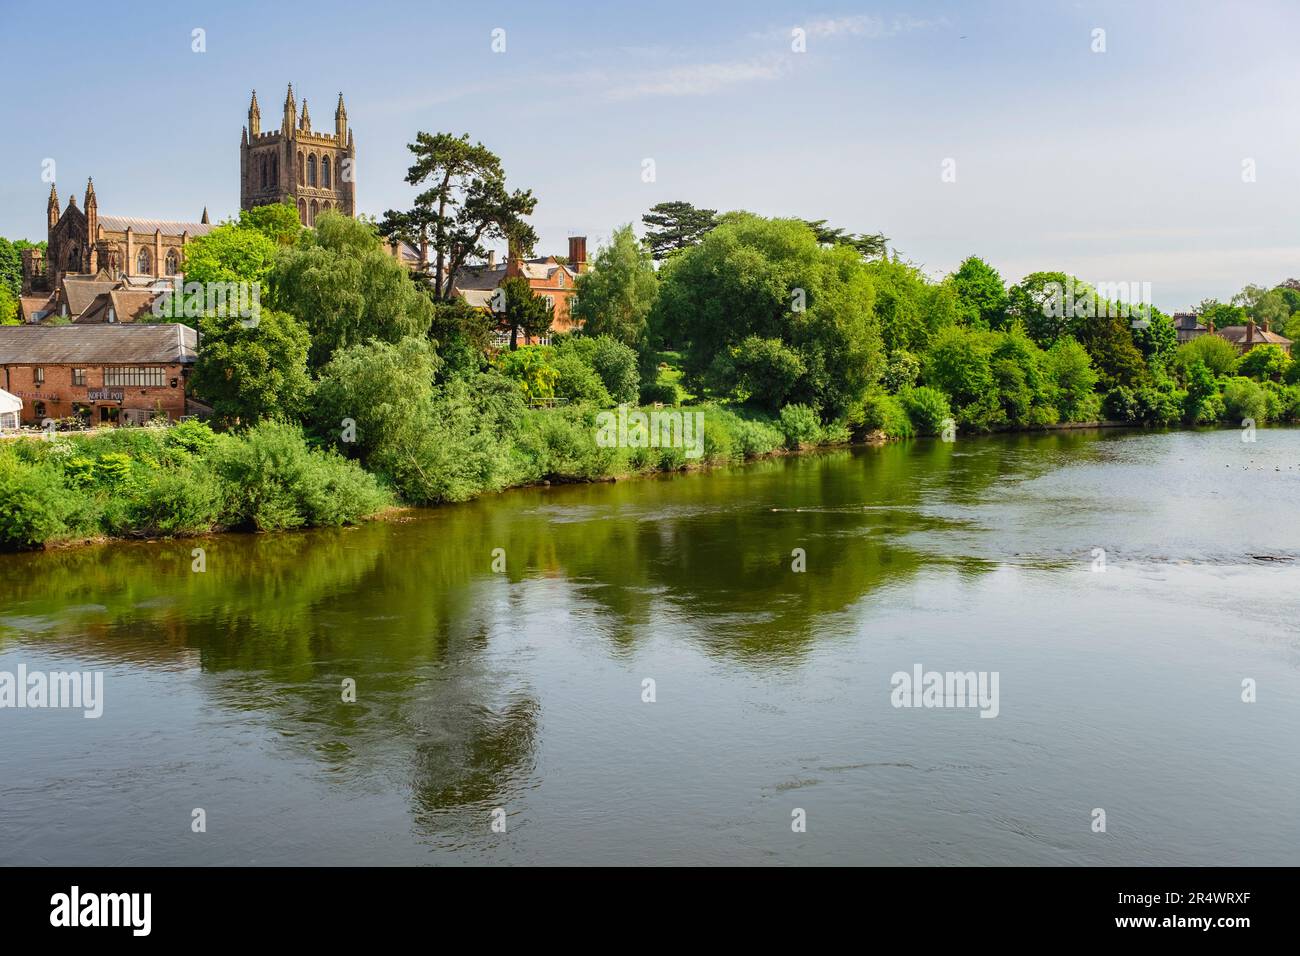 View across the Rver Wye reflecting the Cathedral of Saint Mary the Virgin in Hereford, Herefordshire, England, UK, Britain Stock Photo